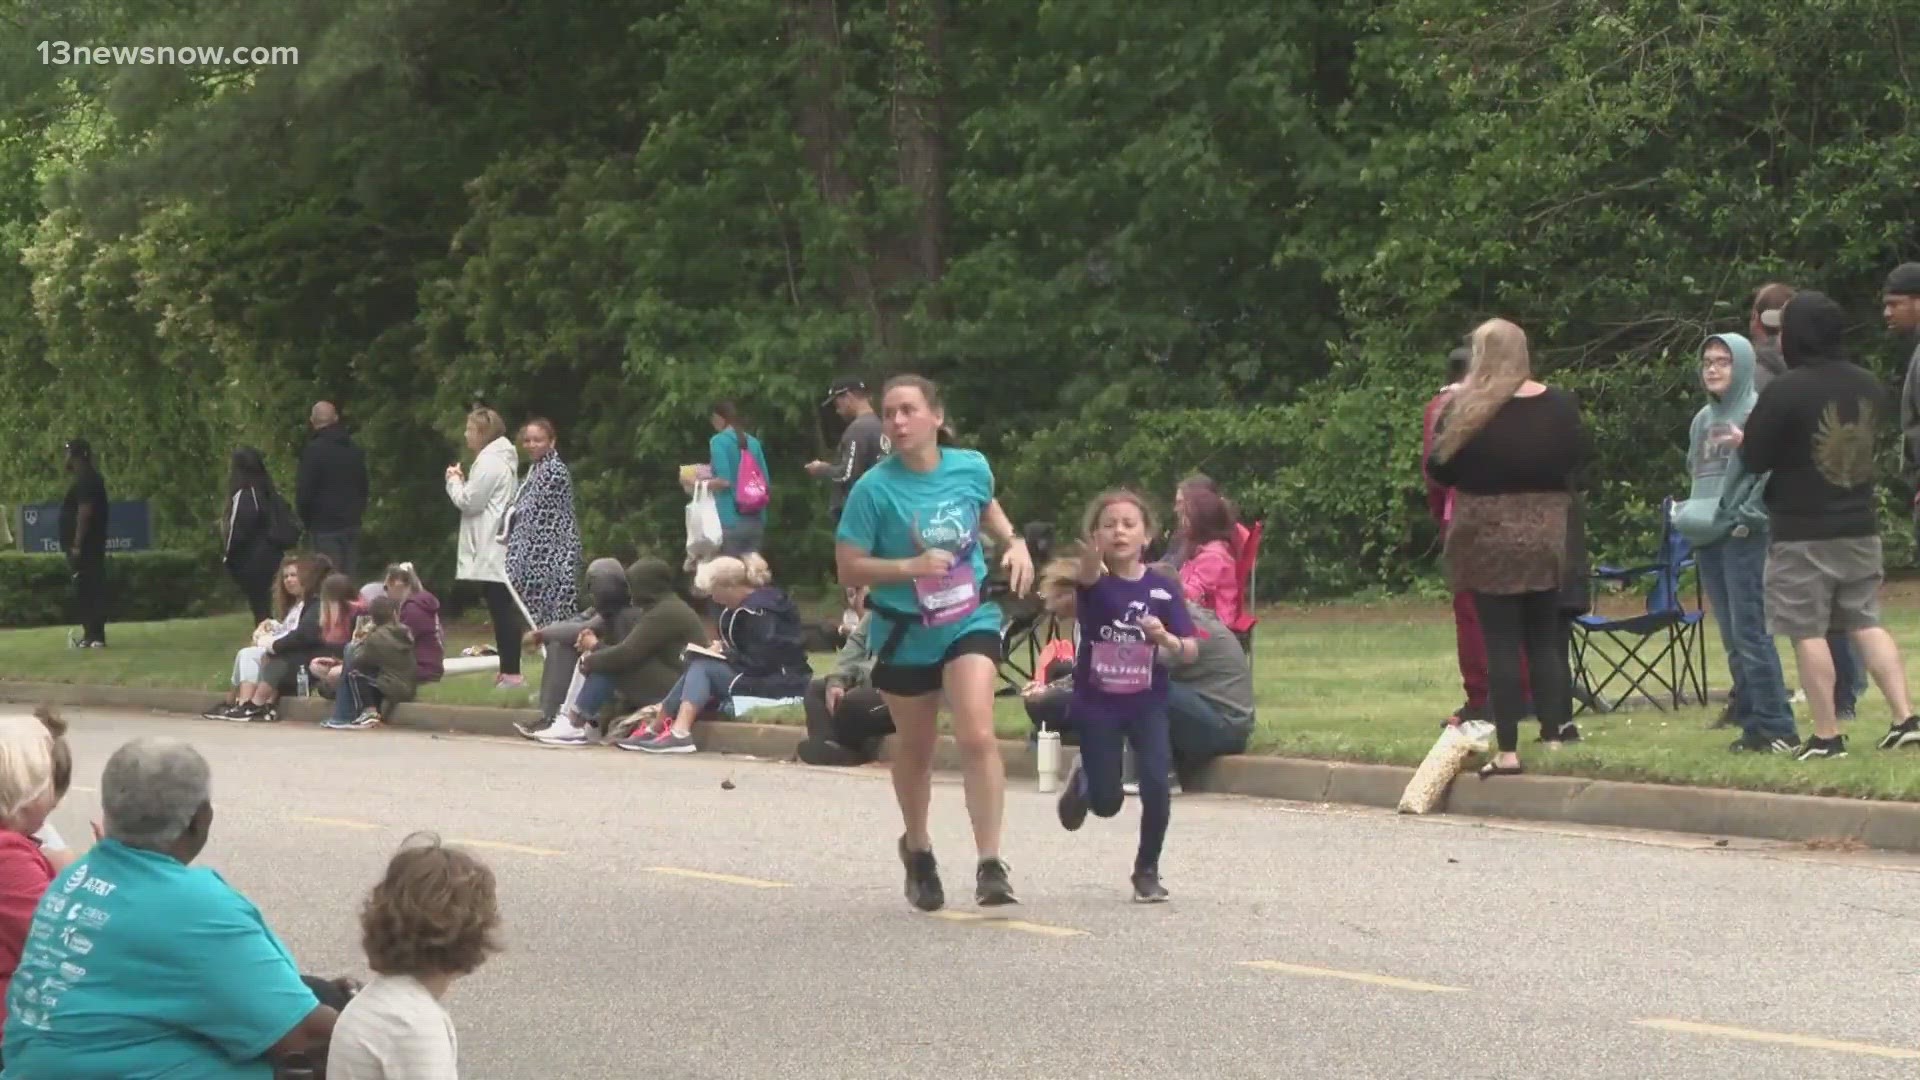 Runners took over Virginia Wesleyan University’s campus Sunday morning and all the runners were little girls from schools across Hampton Roads.